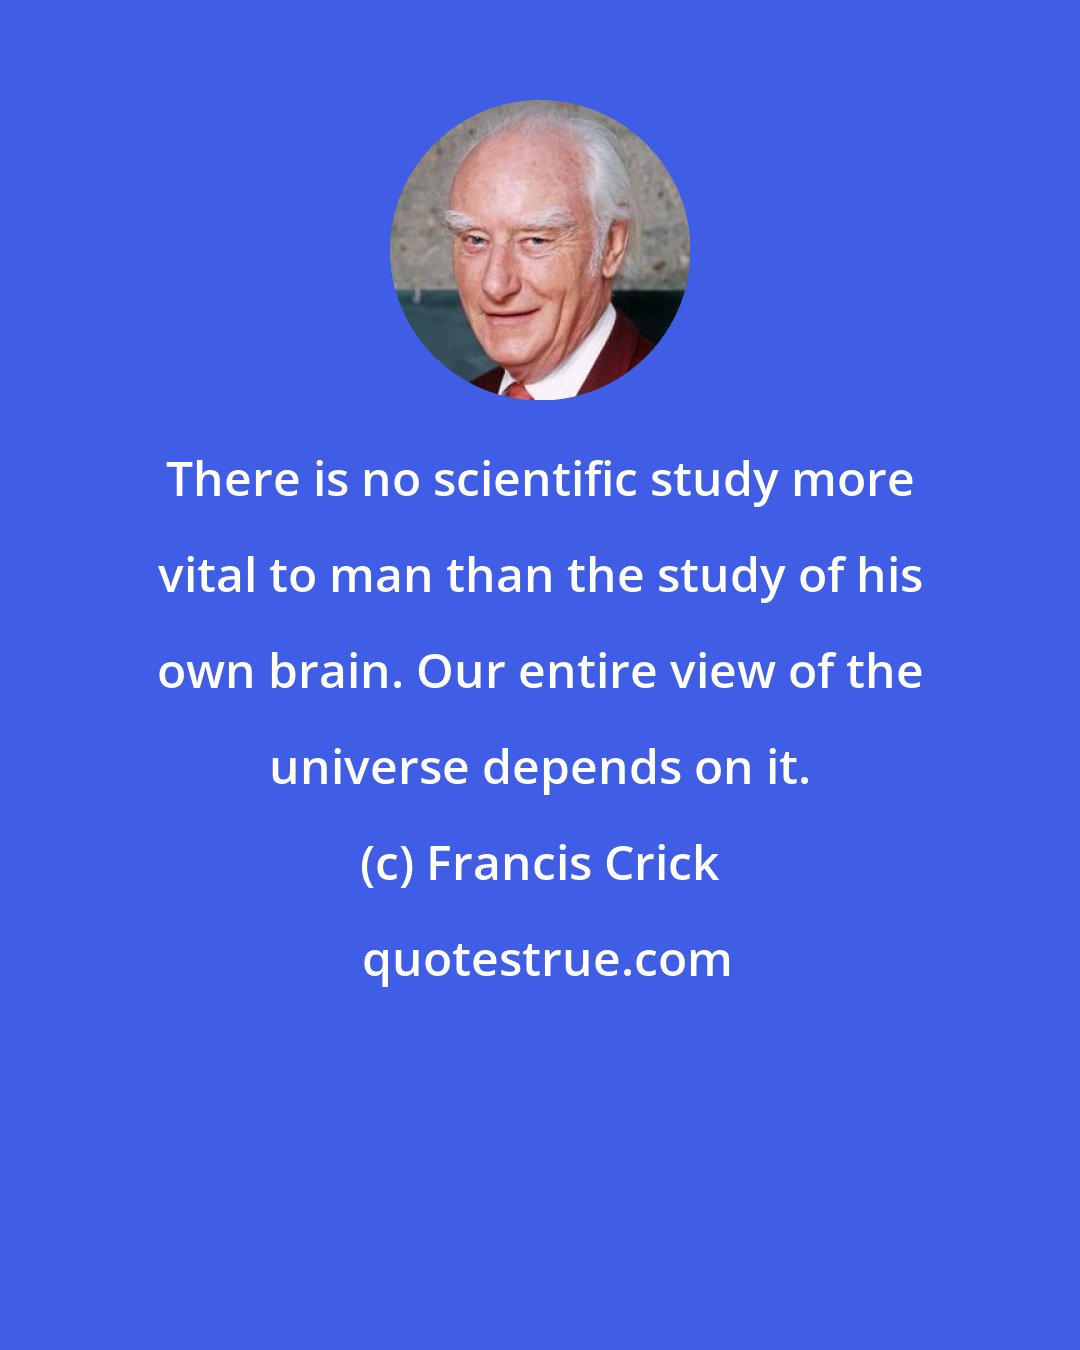 Francis Crick: There is no scientific study more vital to man than the study of his own brain. Our entire view of the universe depends on it.